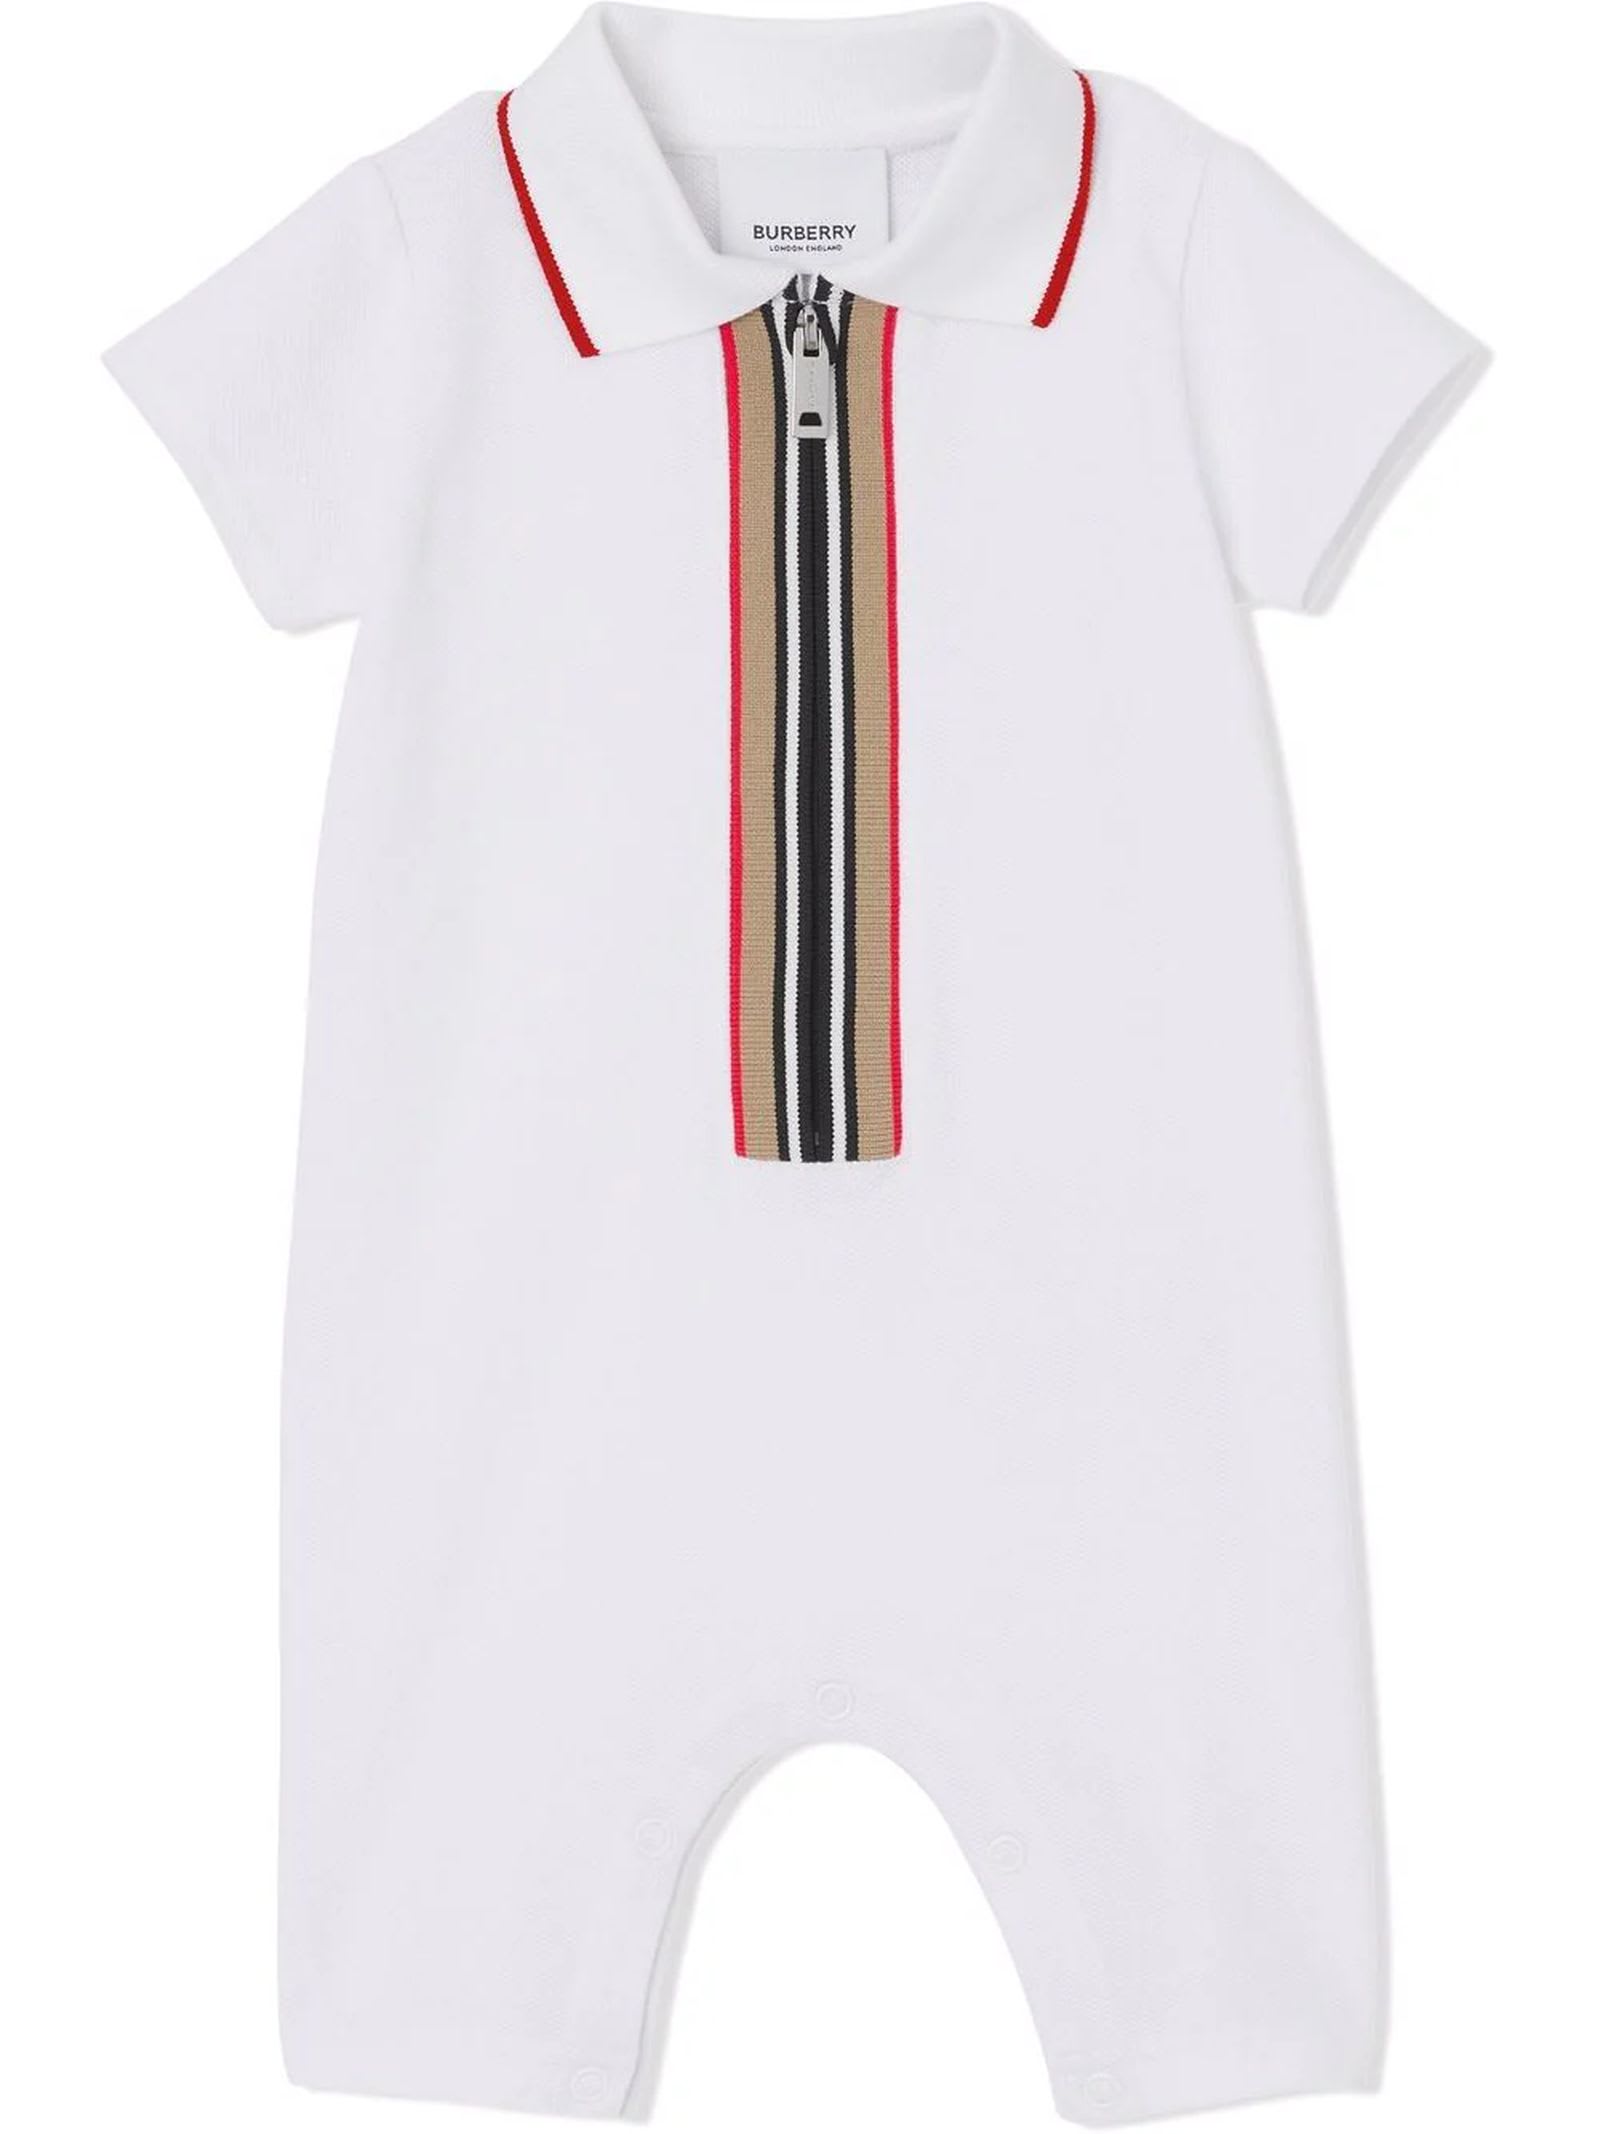 Burberry White Cotton Playsuit